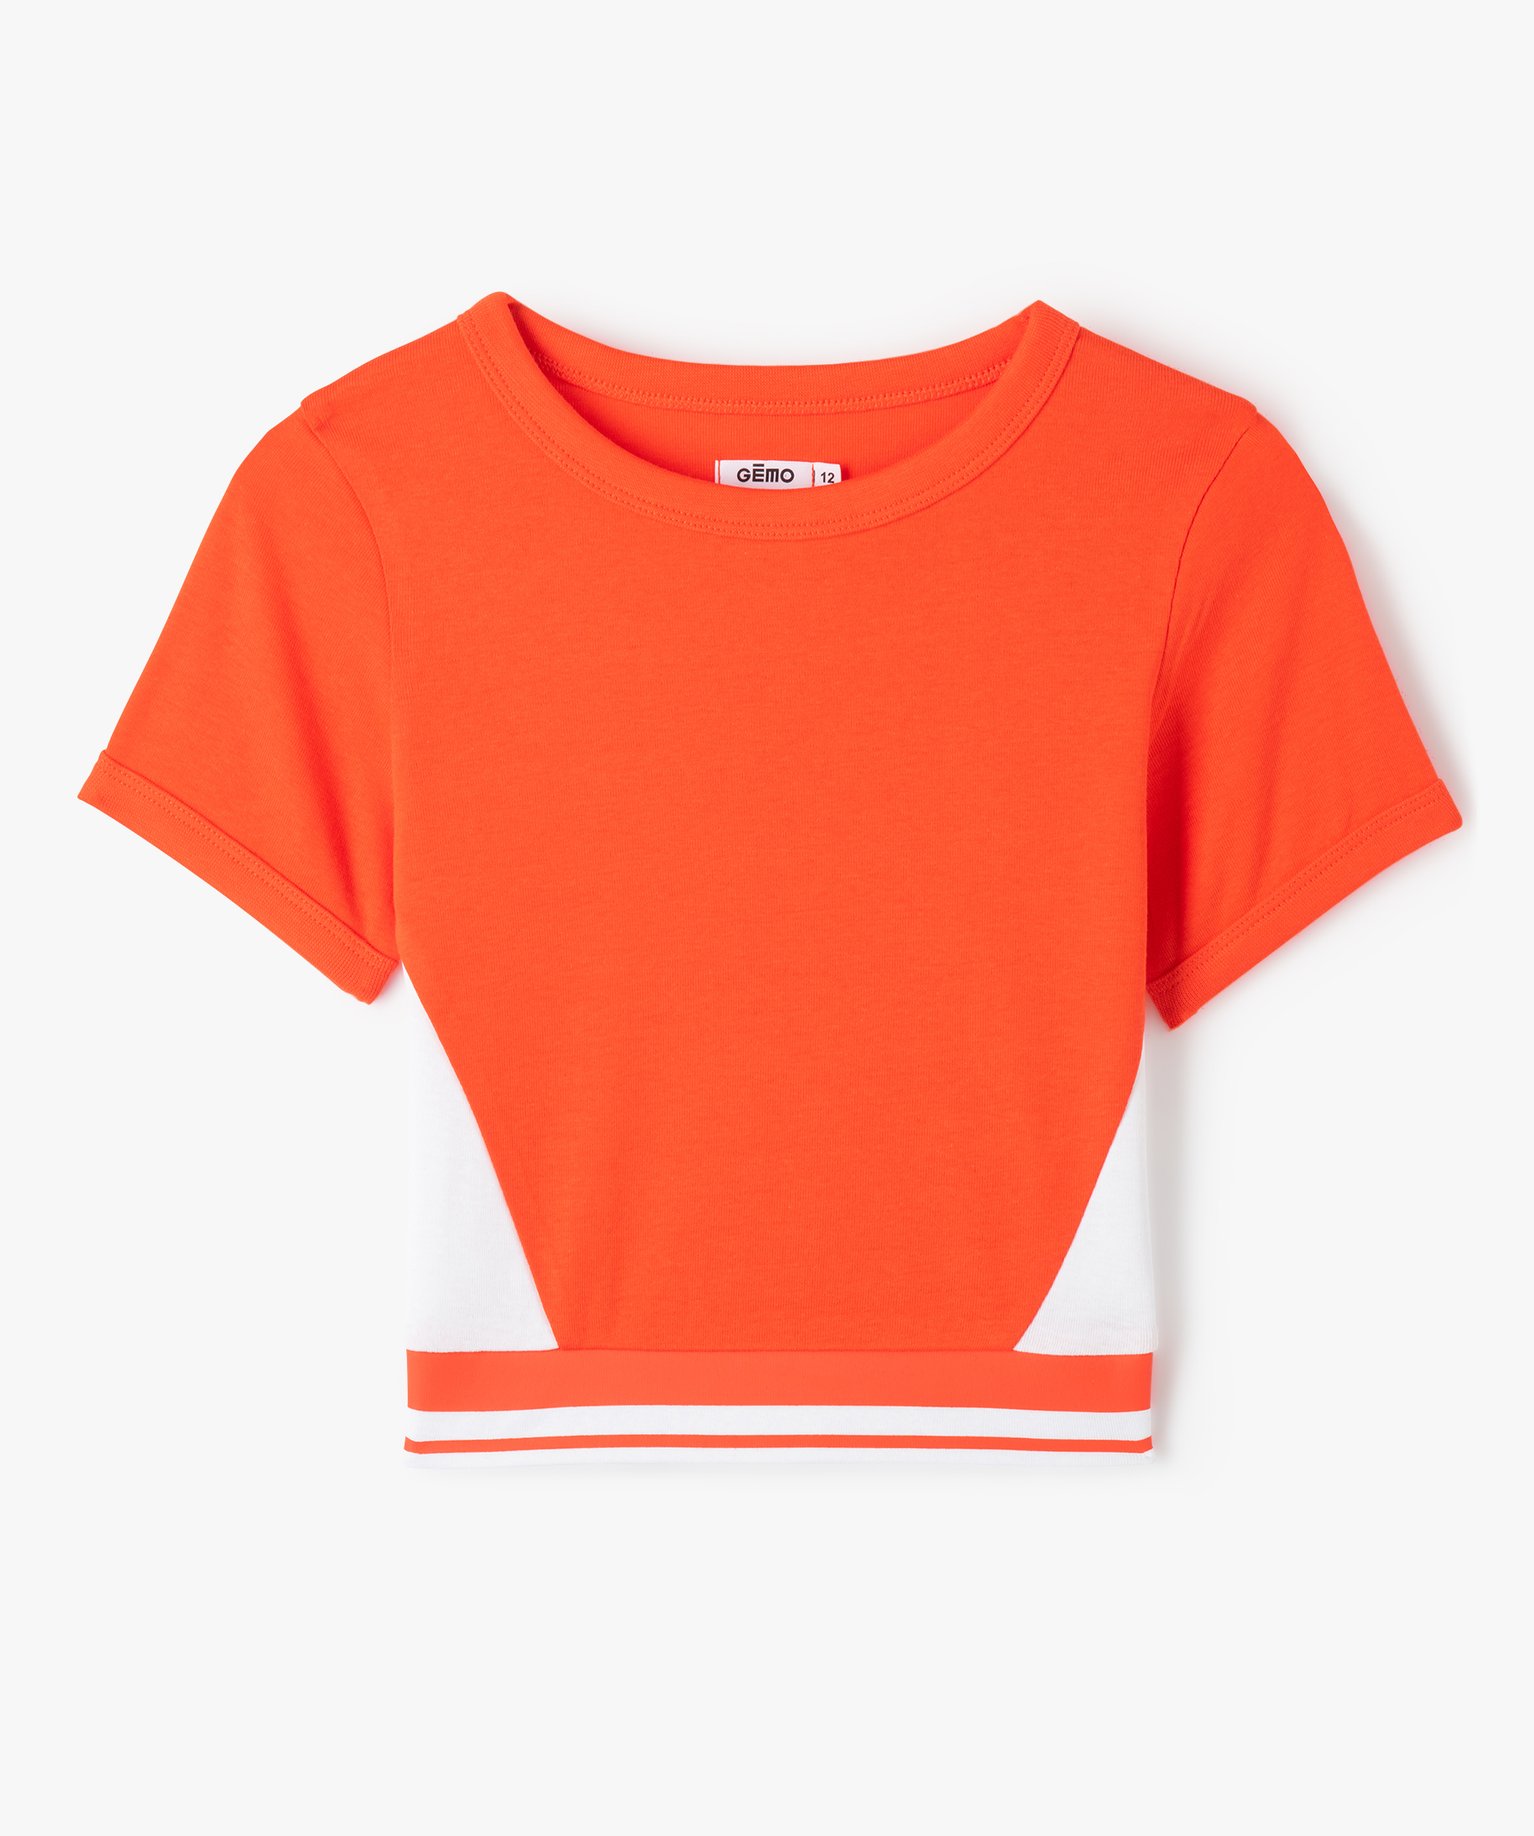 tee-shirt fille bicolore court a manches courtes orange tee-shirts